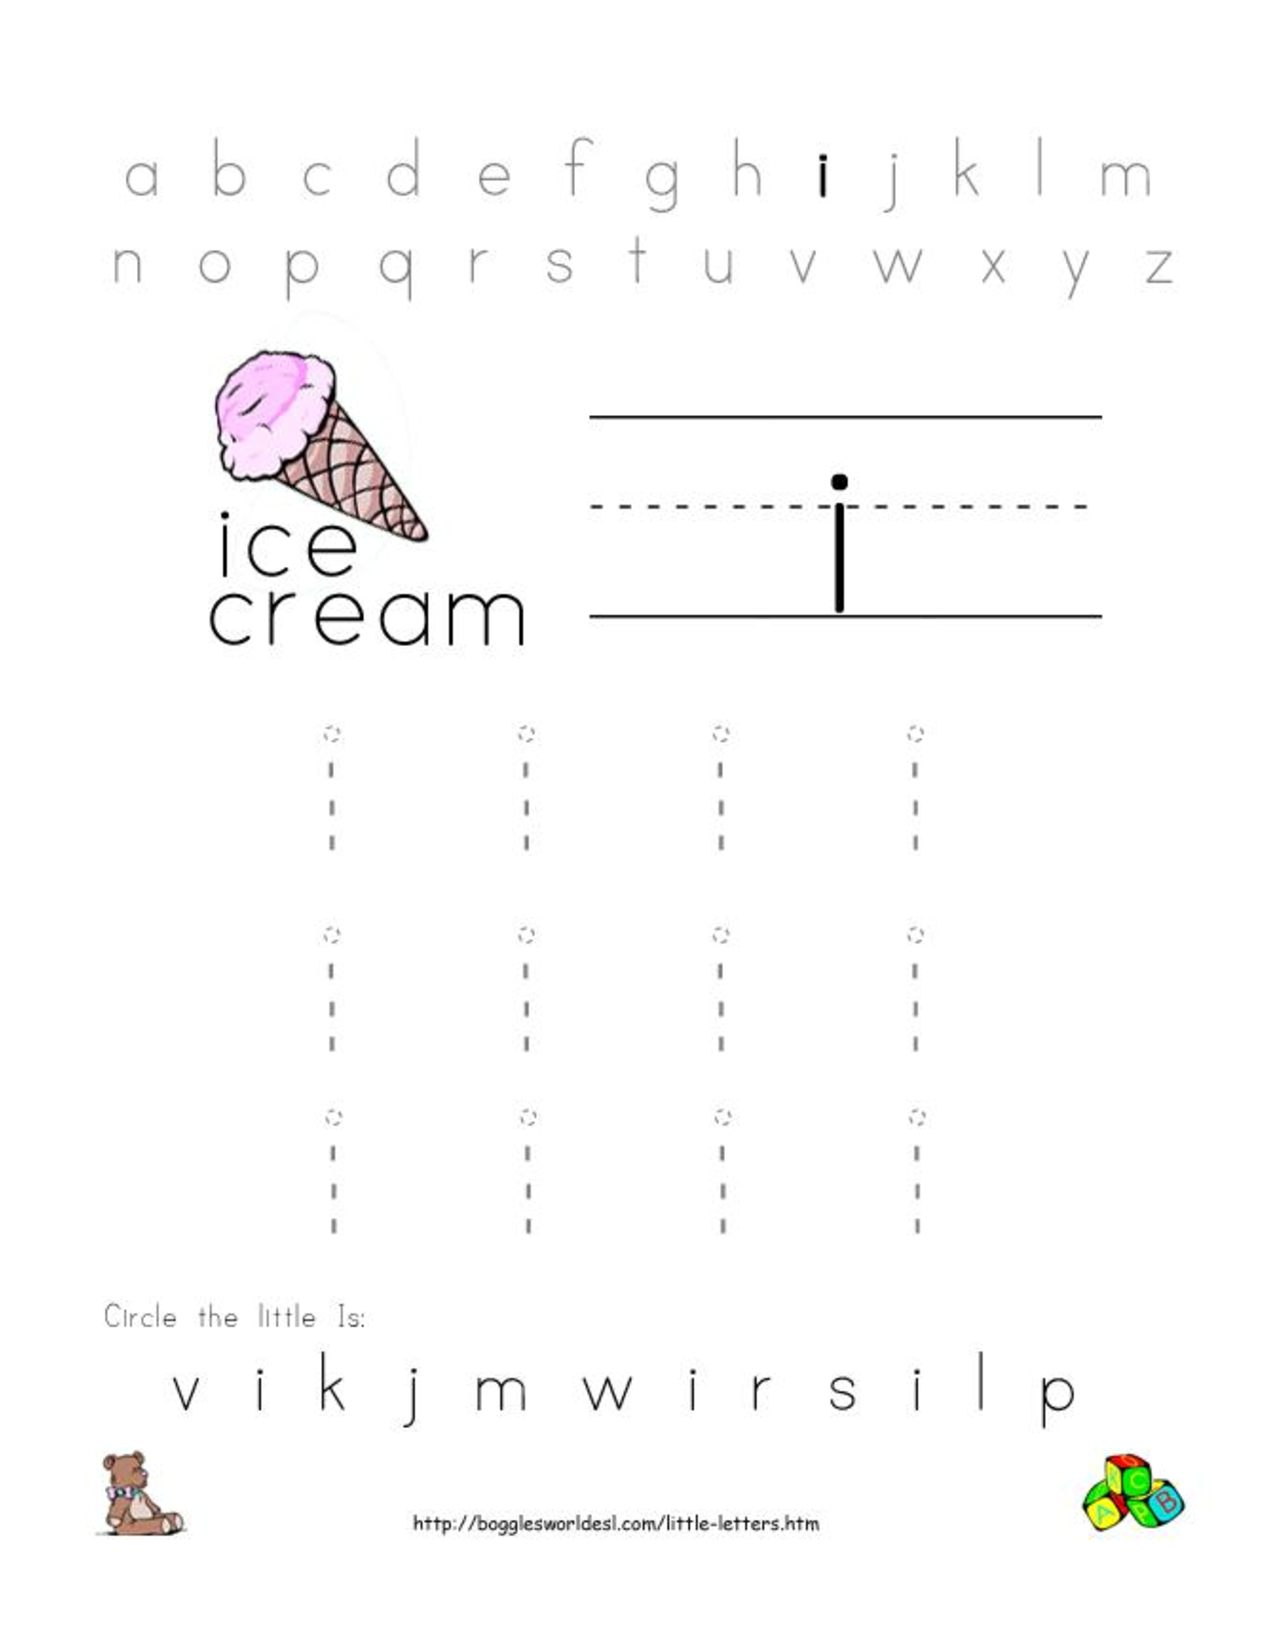 Free Printable Letter Worksheets | Activity Shelter pertaining to Letter I Worksheets Printable